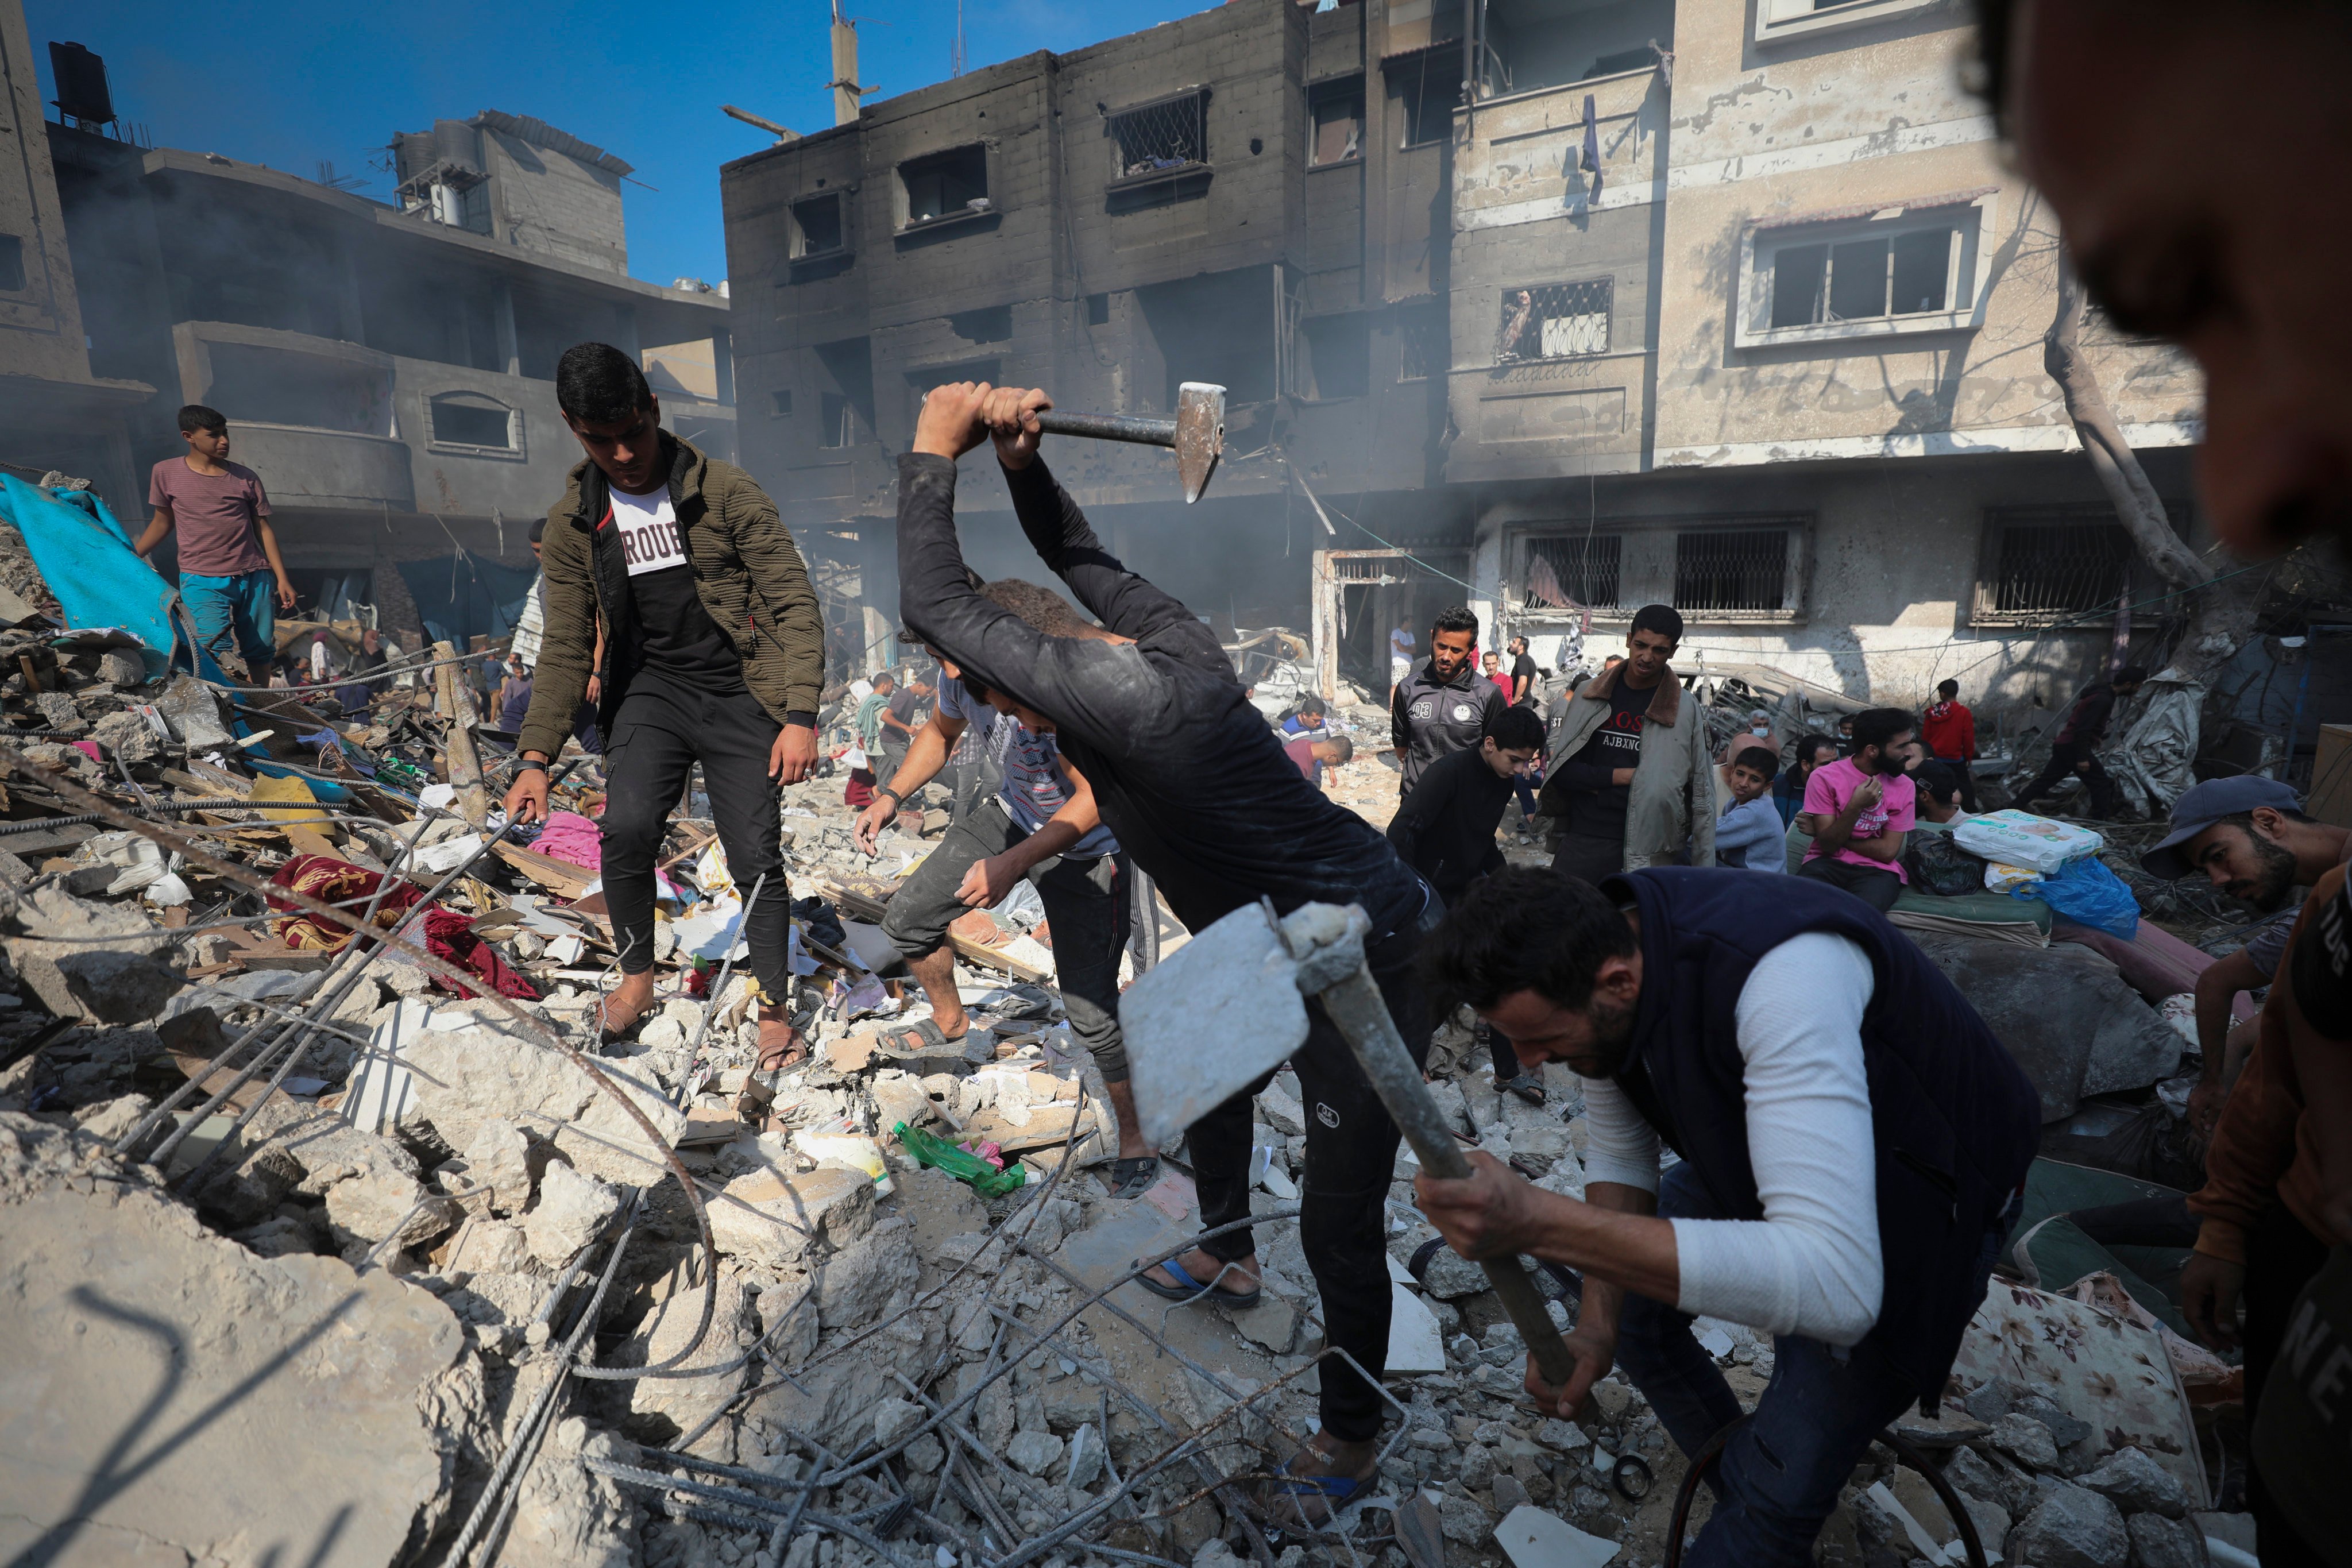 Palestinians search for survivors after an Israeli strike on Nusseirat refugee camp, in the central Gaza Strip on Friday. Photo: AP